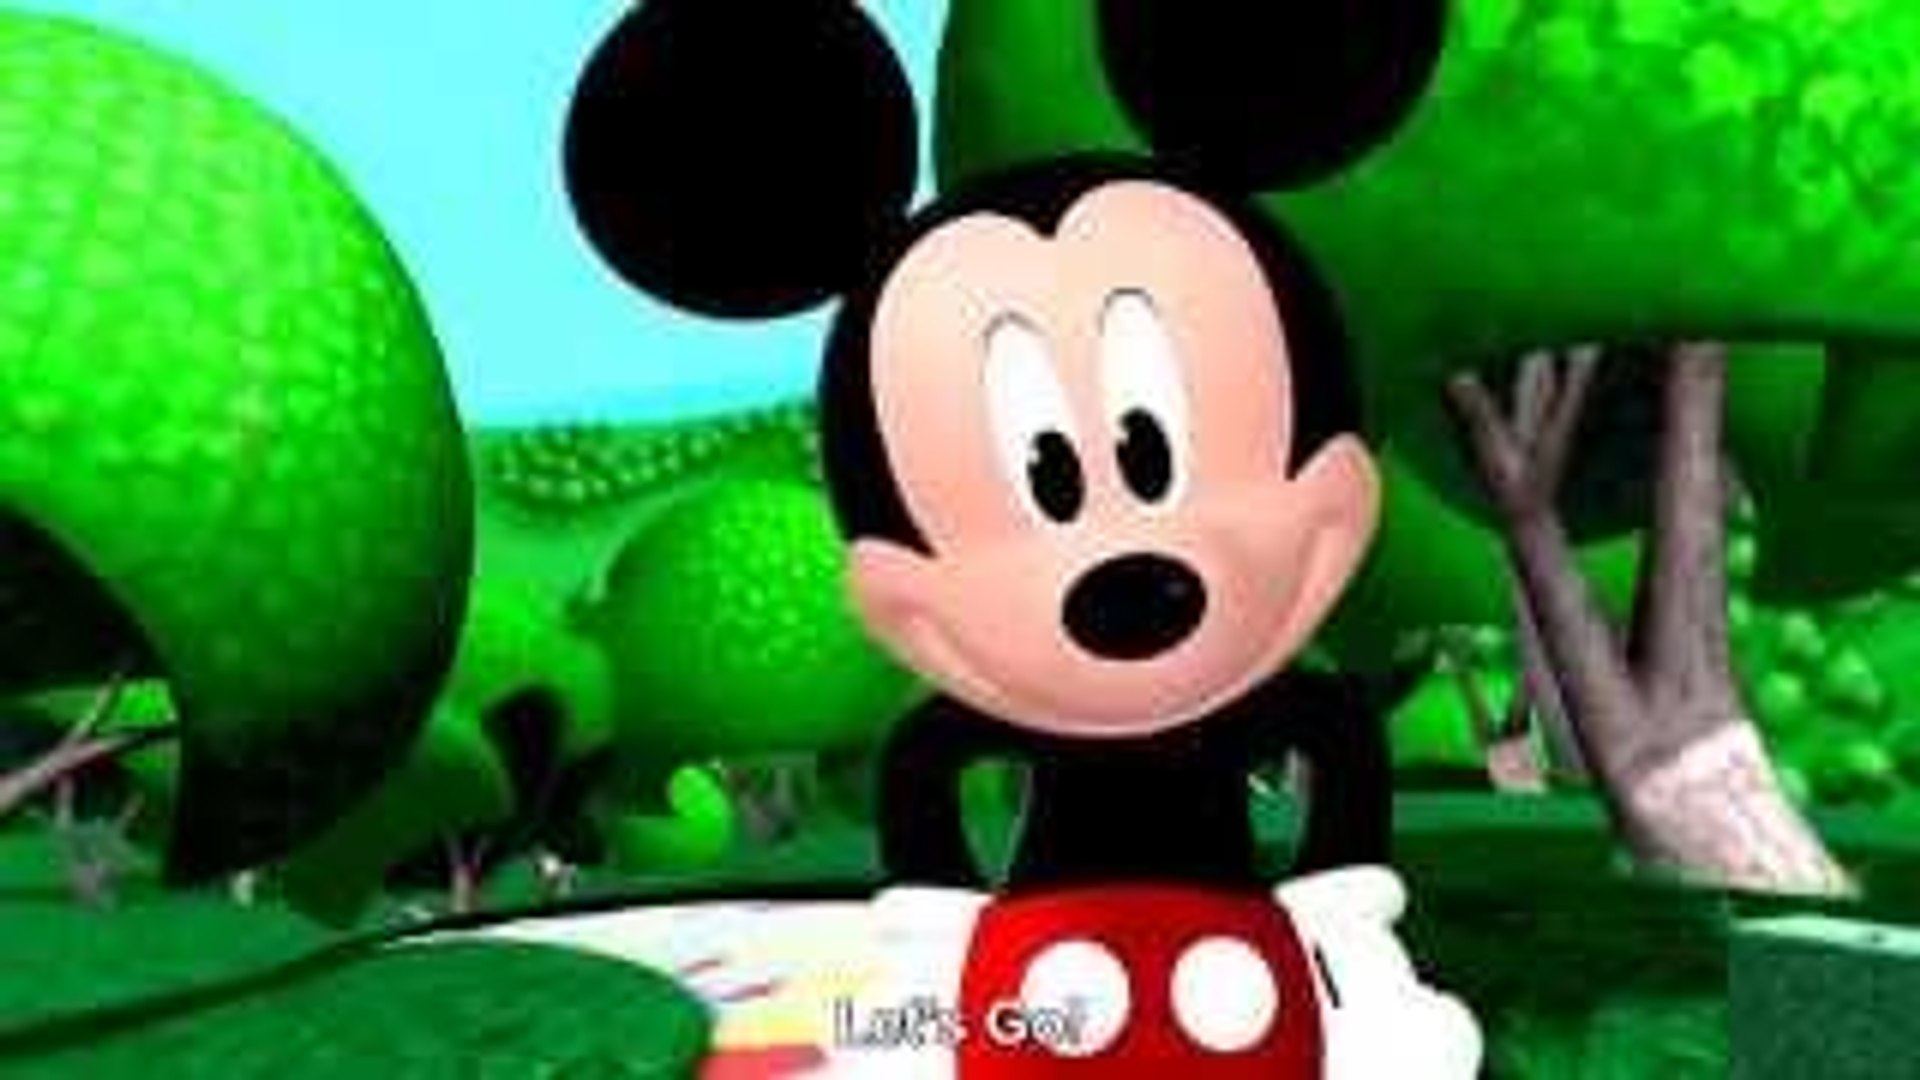 Mickey Mouse Clubhouse theme song season 1 